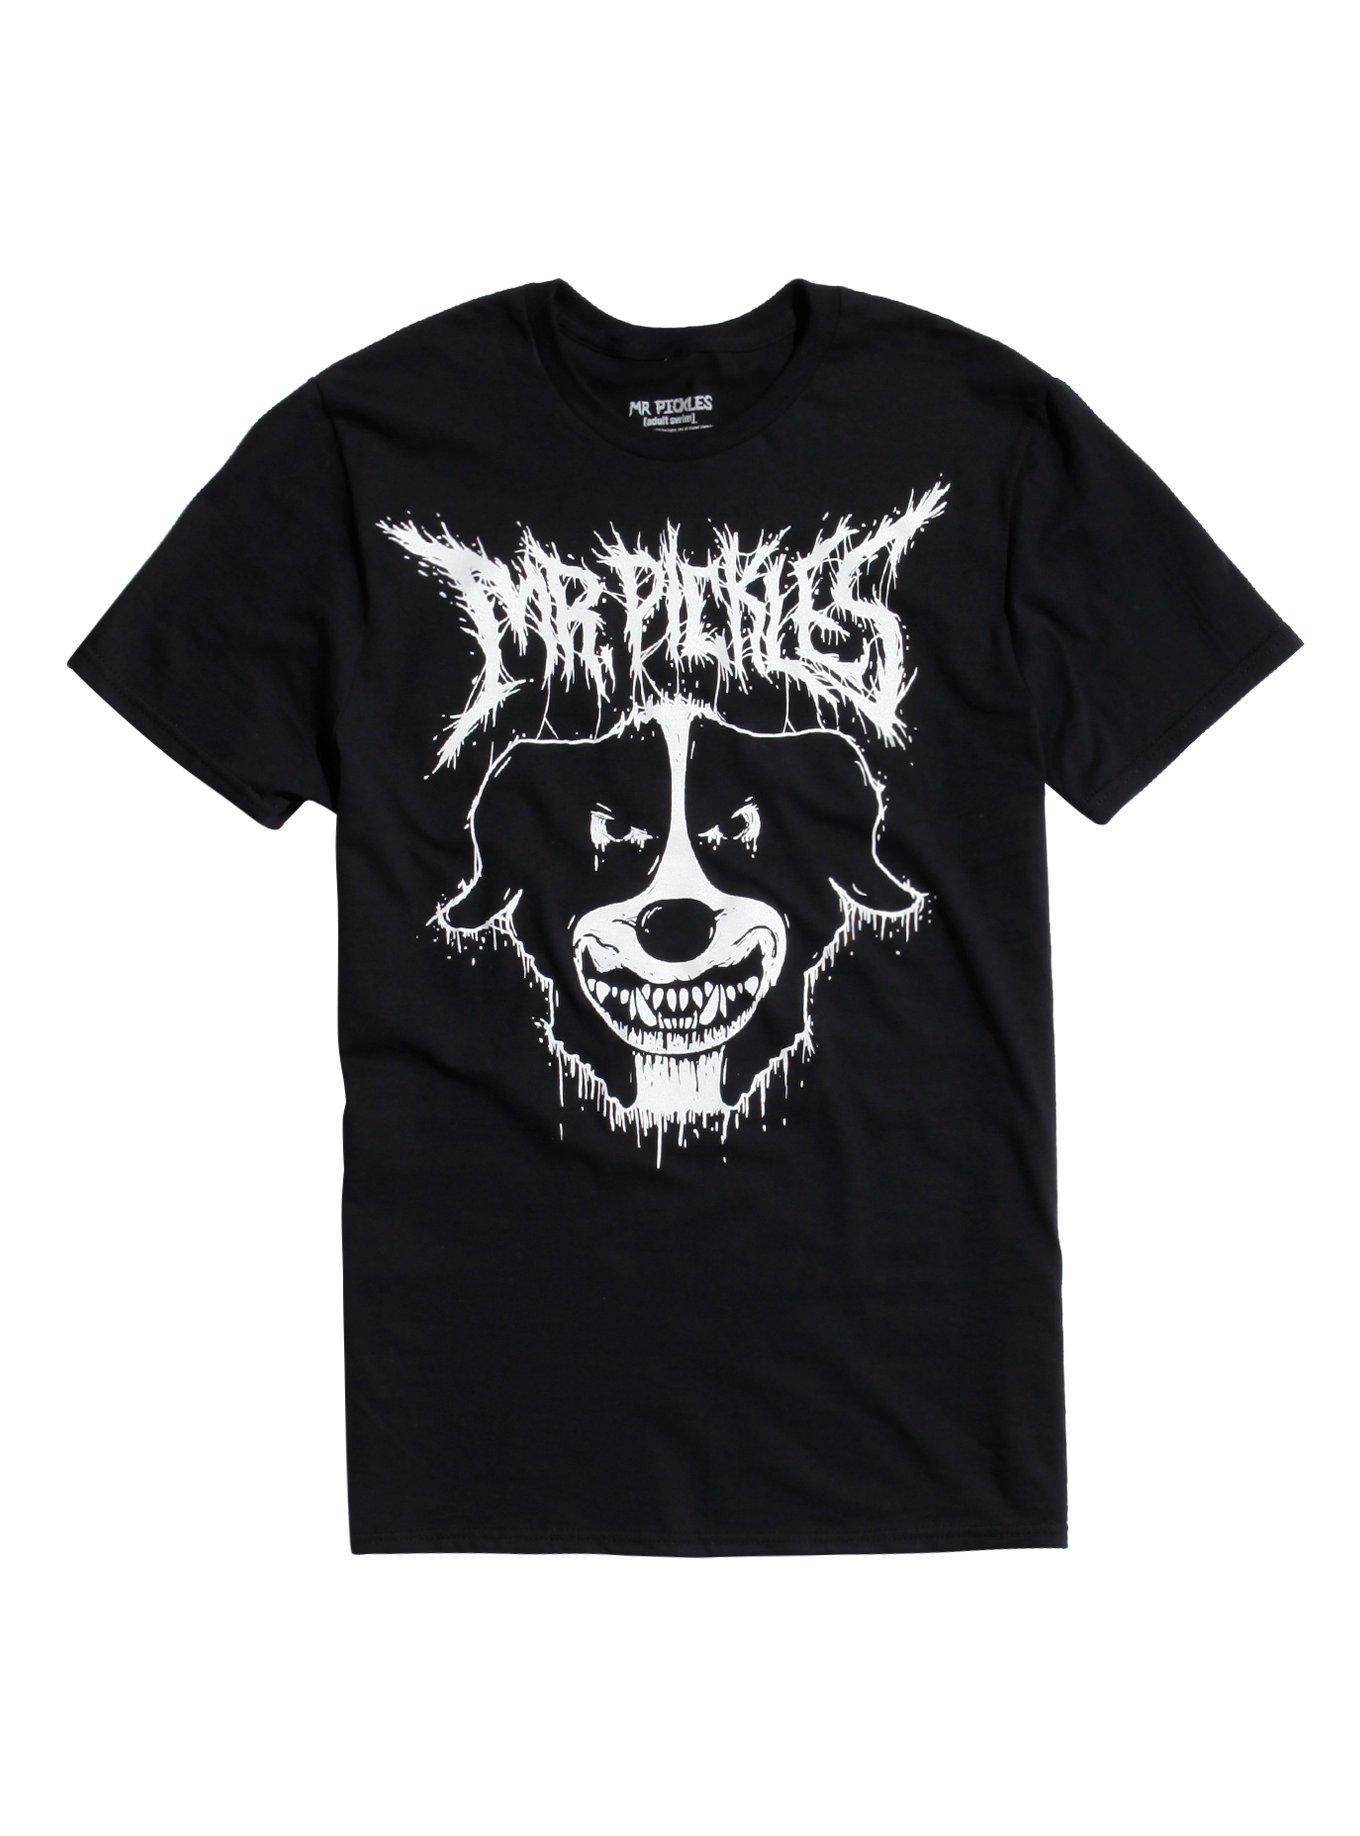 Mr Pickles Thumbs Up T-Shirt